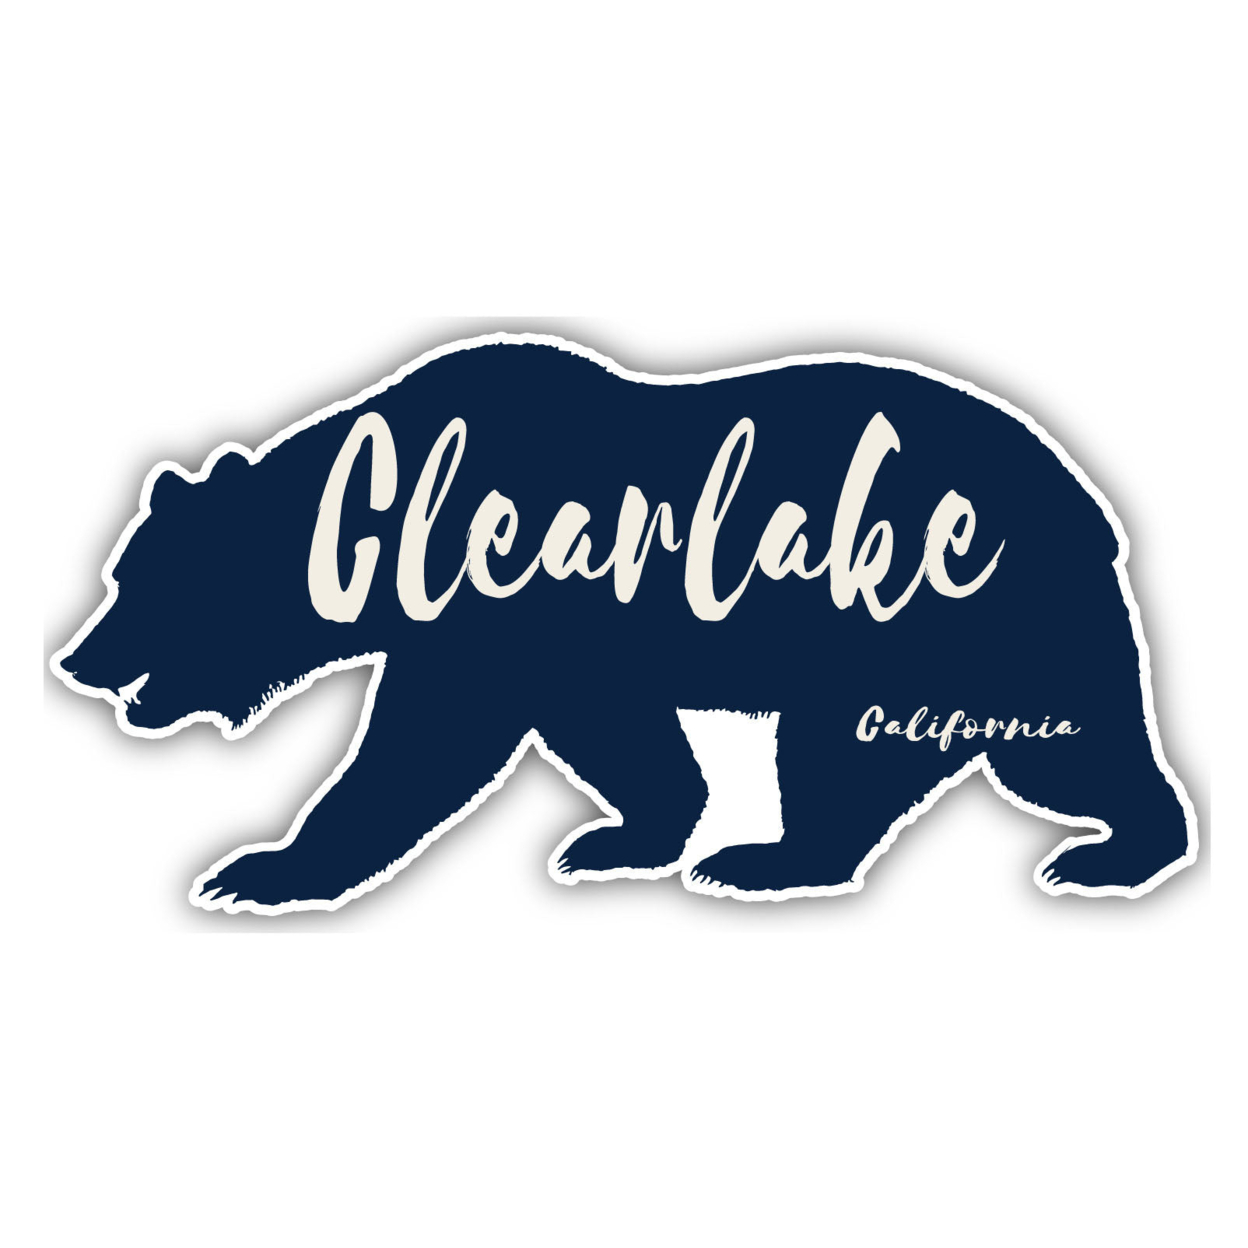 Clearlake California Souvenir Decorative Stickers (Choose Theme And Size) - 4-Pack, 6-Inch, Bear